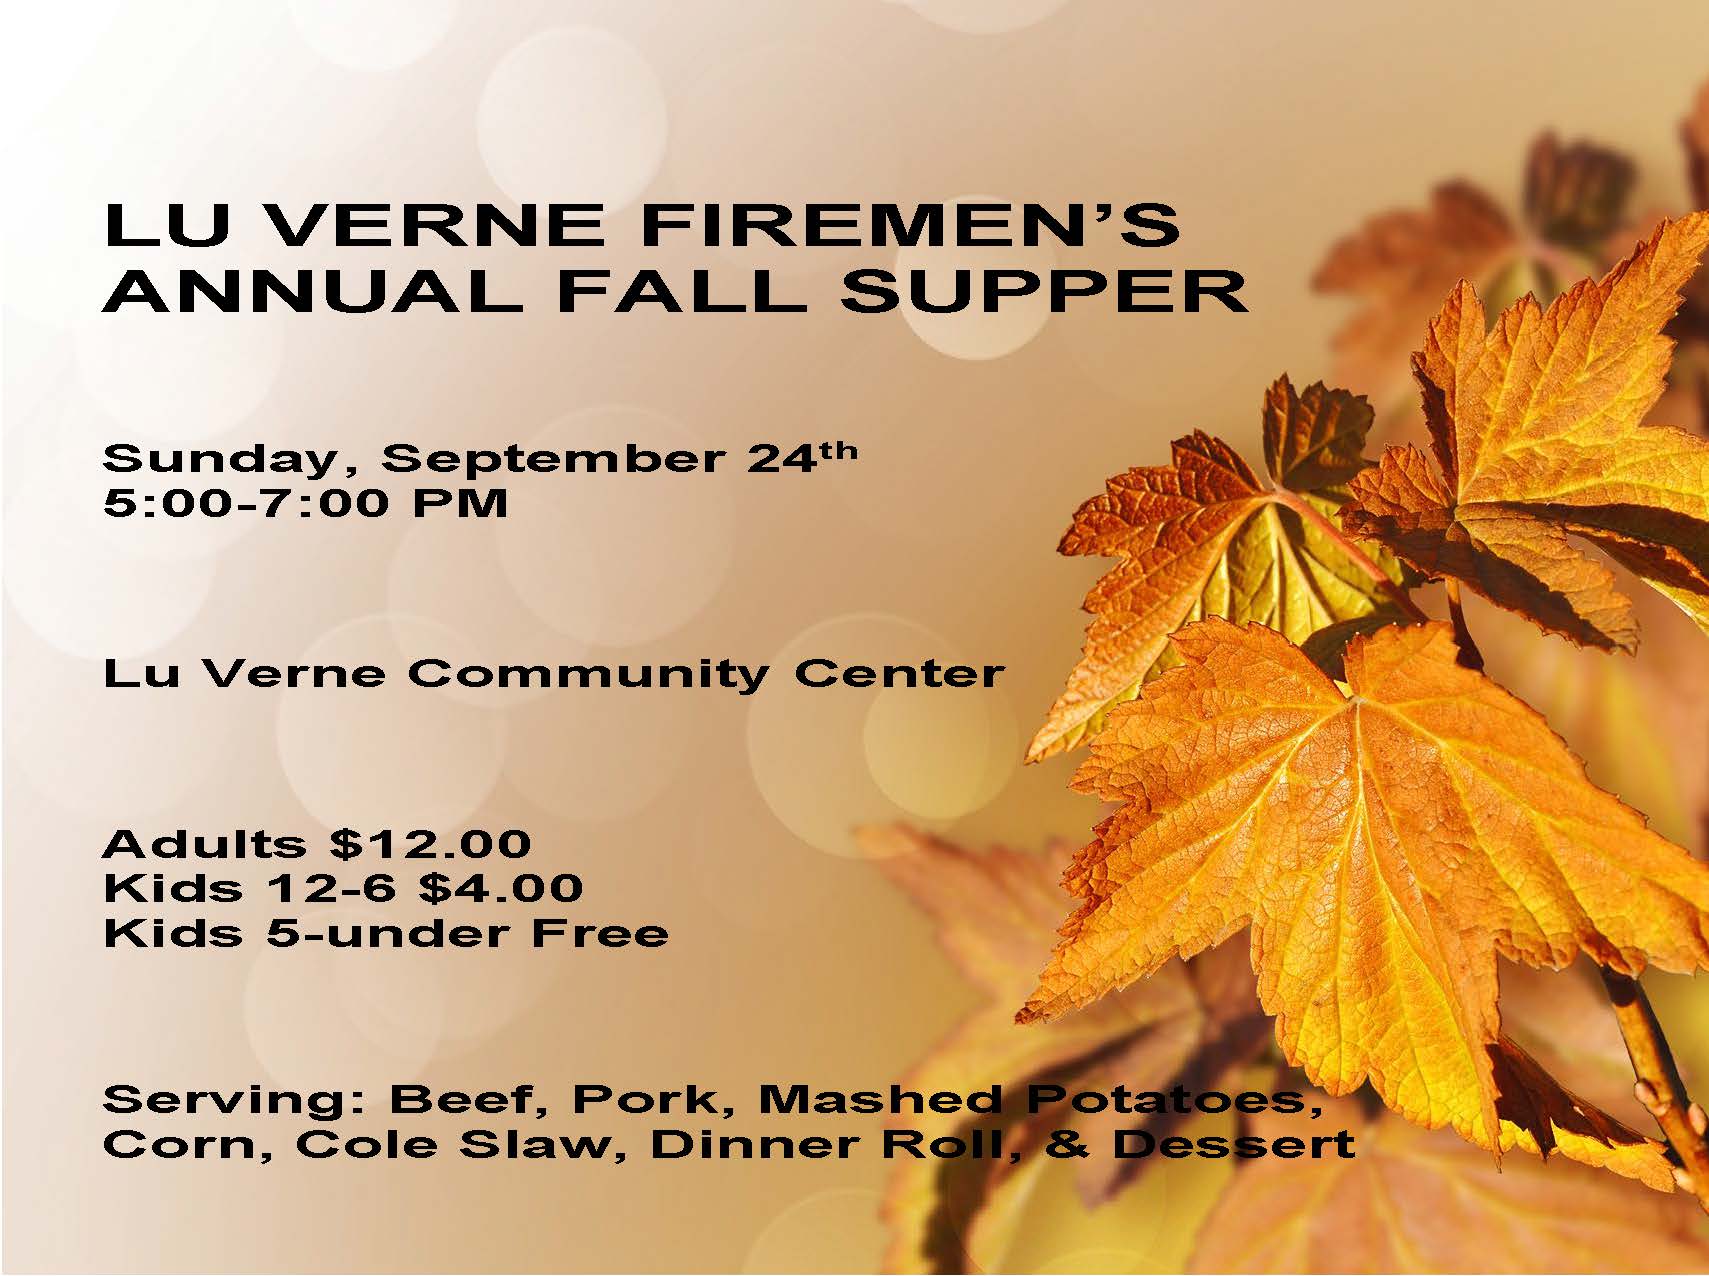 The LuVerne Firemen's Annual Fall Supper